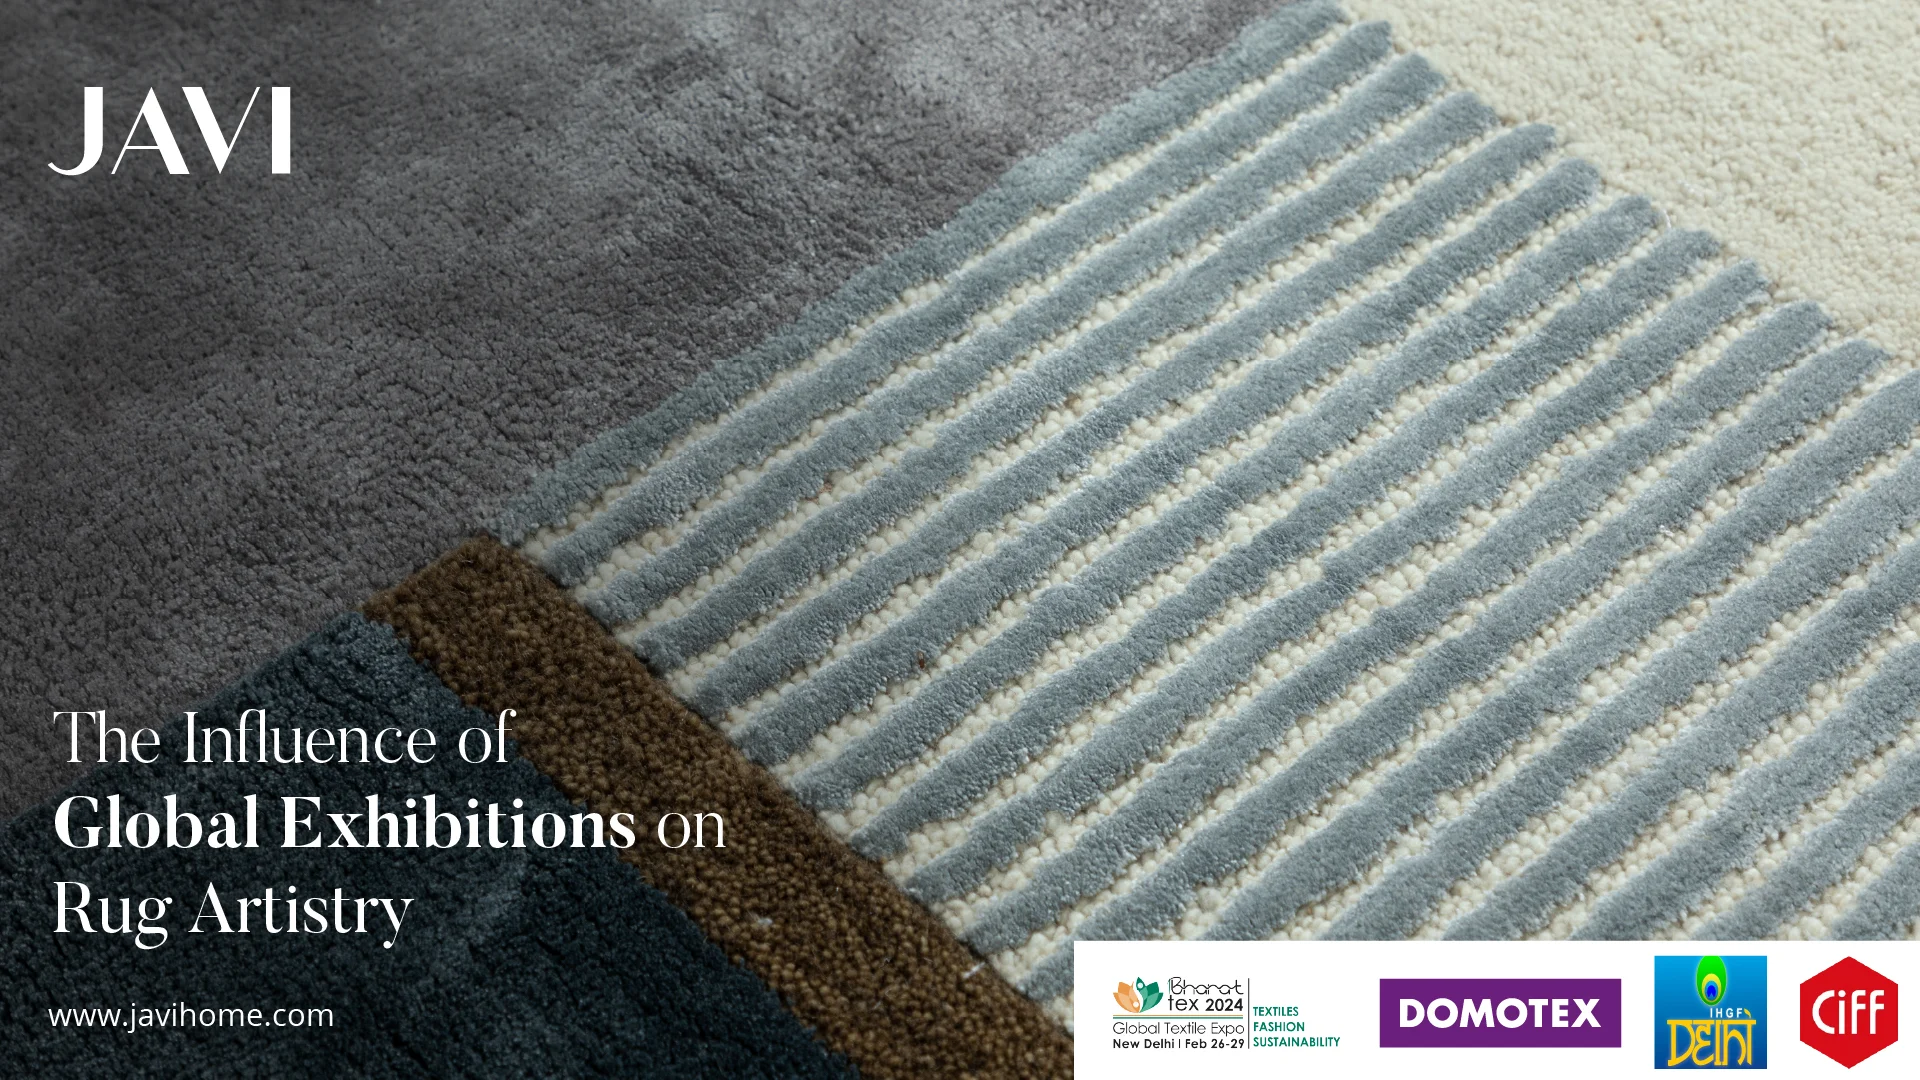 The Influence of Global Exhibitions on Rug Artistry